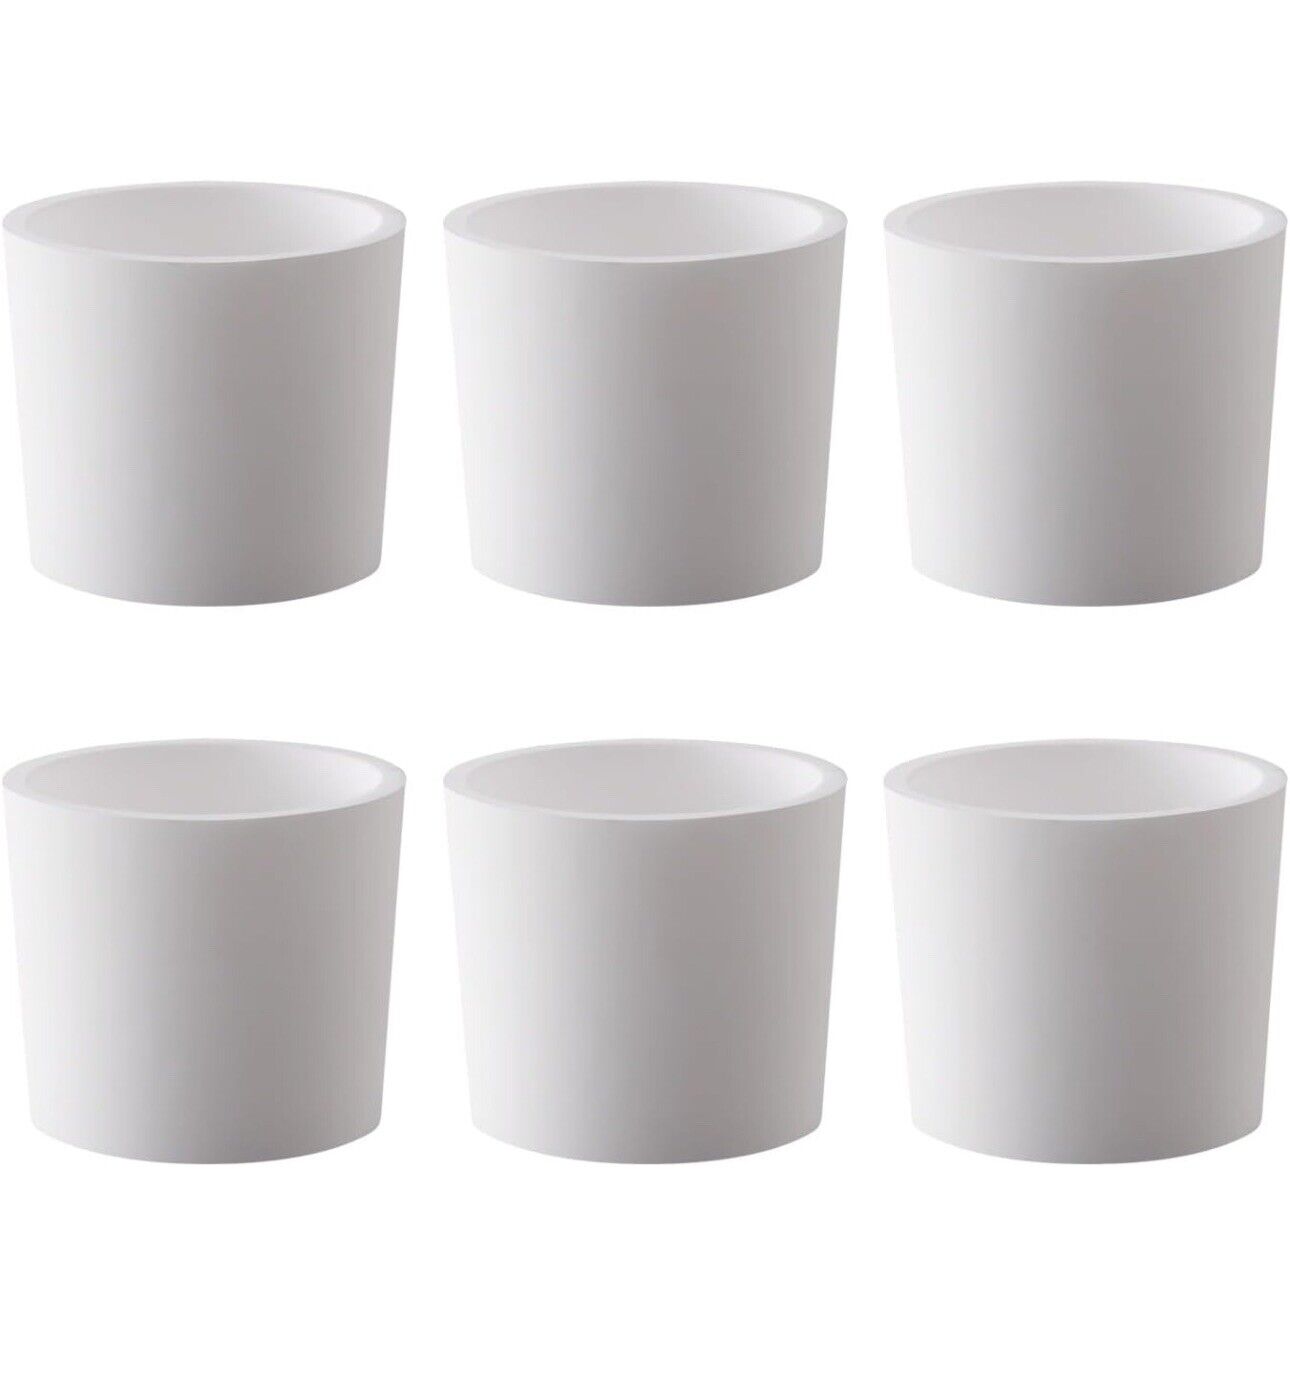 A.I.FORCE 6 Pack Ceramic Inserts for Peak Accessory Bowl, Enhanced Performance, 